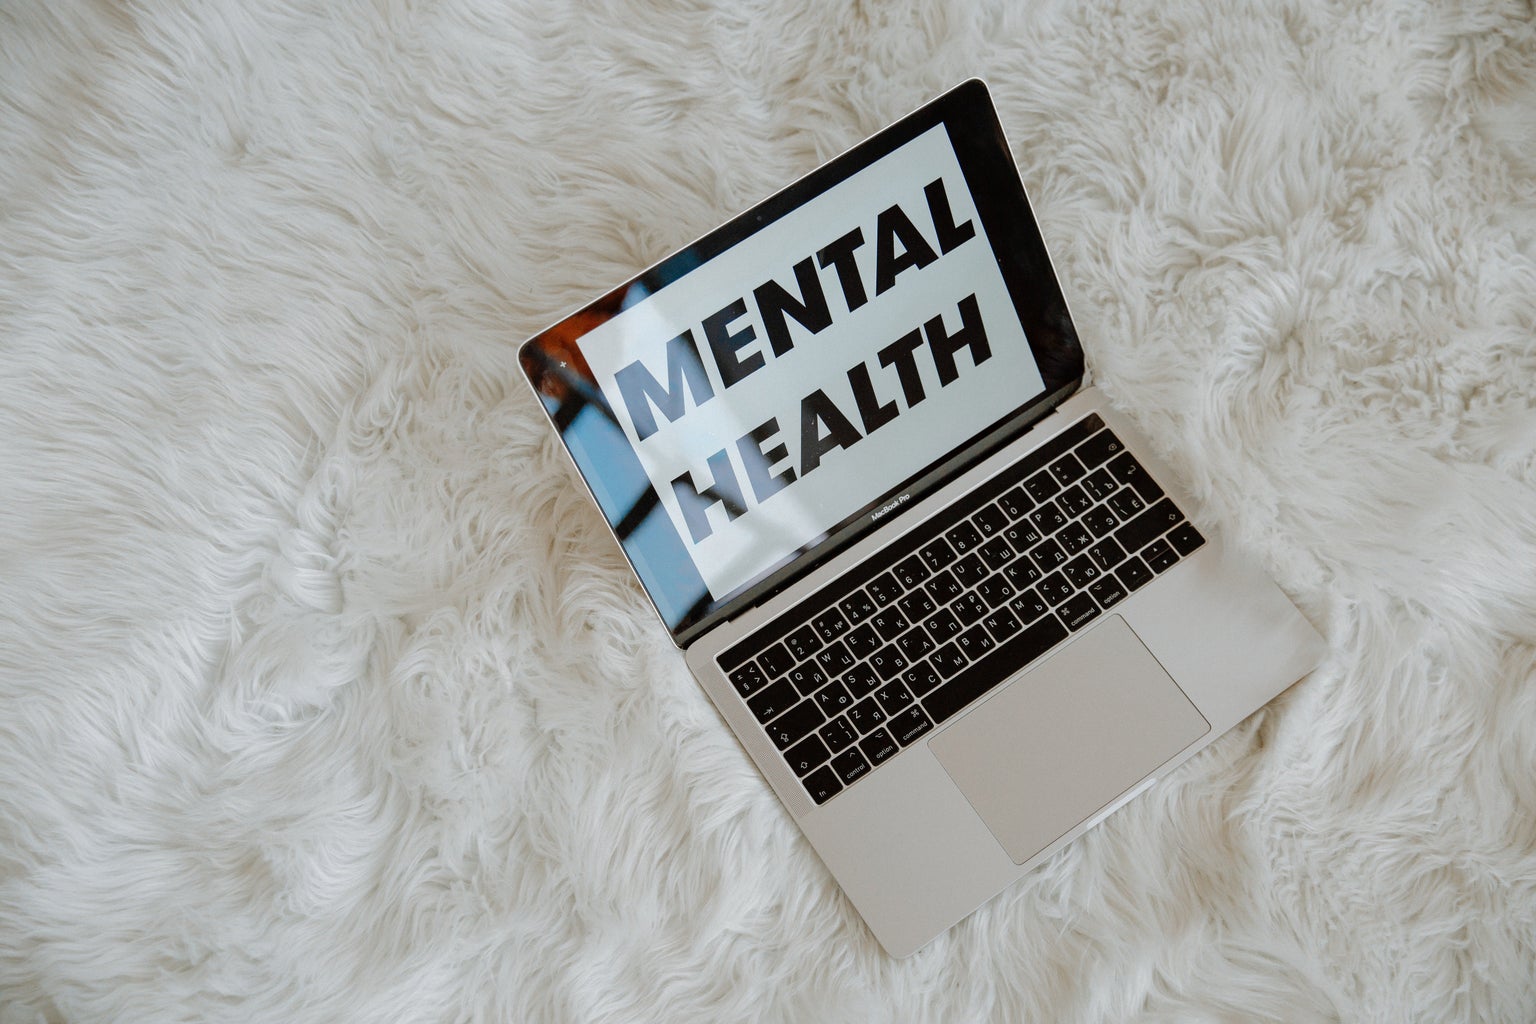 Laptop with text on the screen that reads "Mental Health" on a white carpet